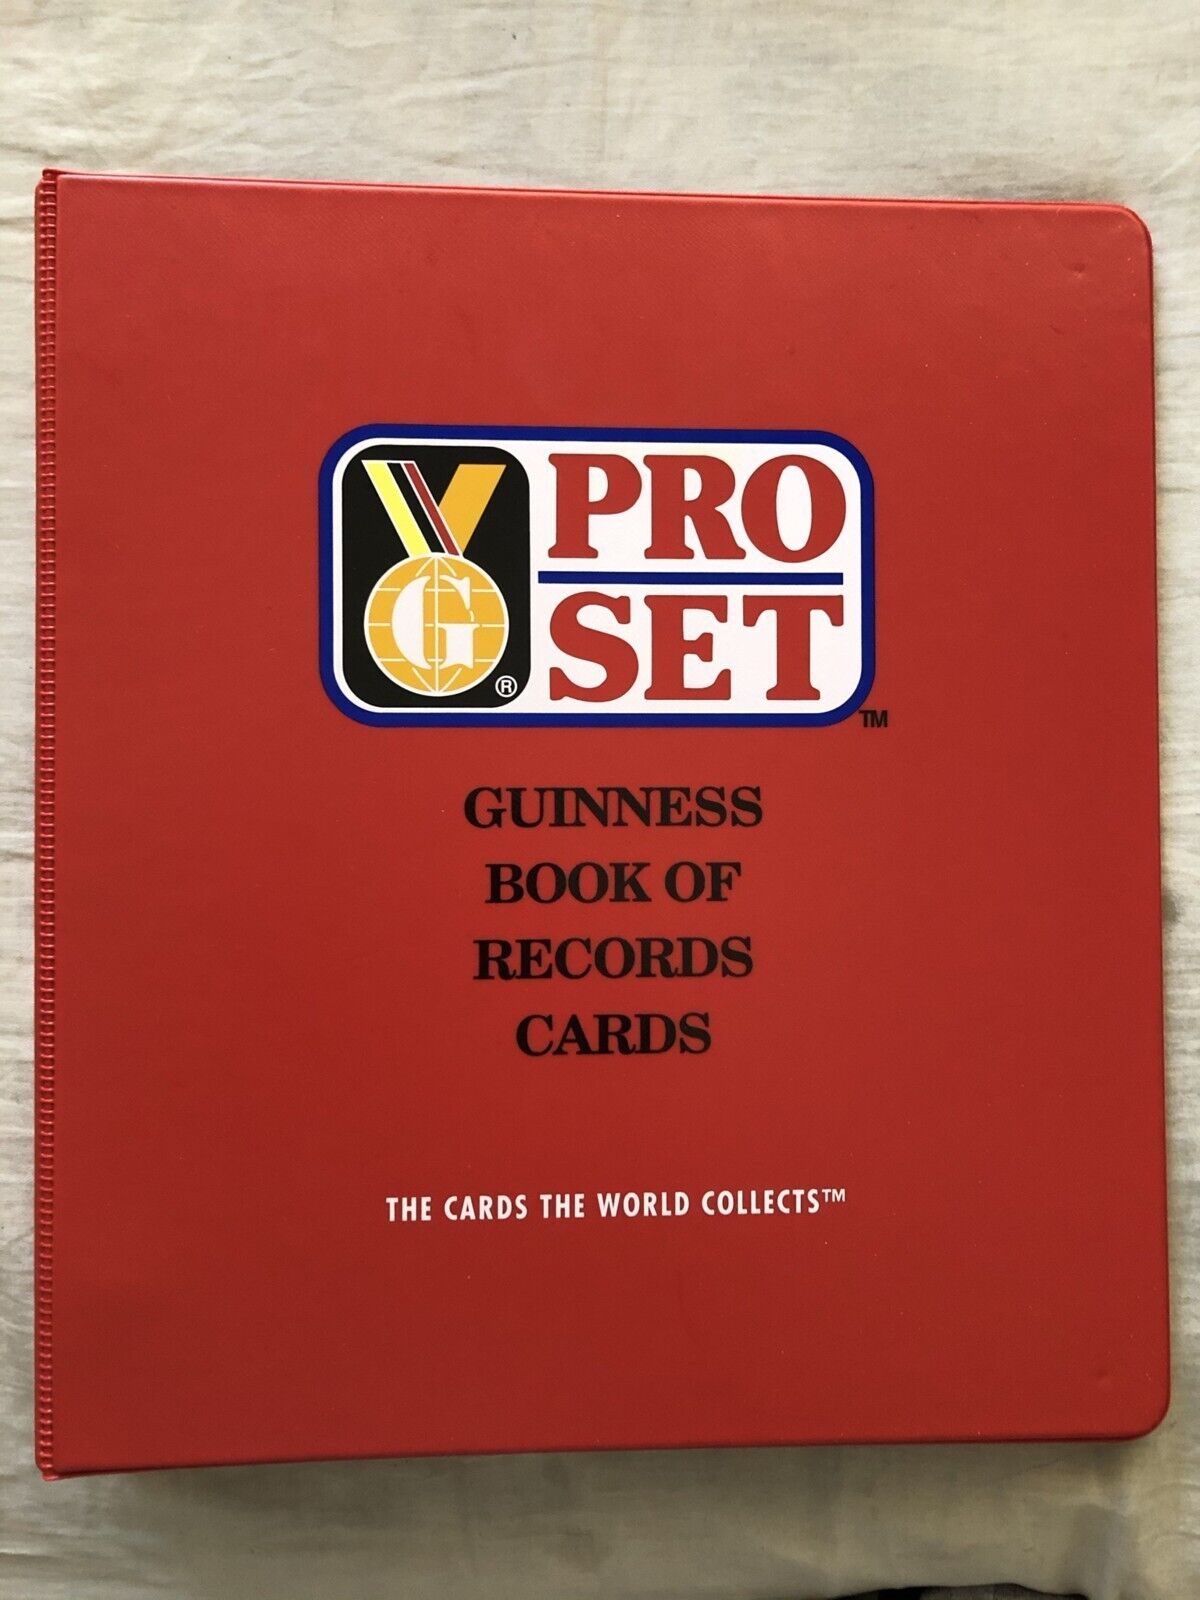 Guinness Book of Records 1992 Pro Set trading cards 3 ring album or binder NEW